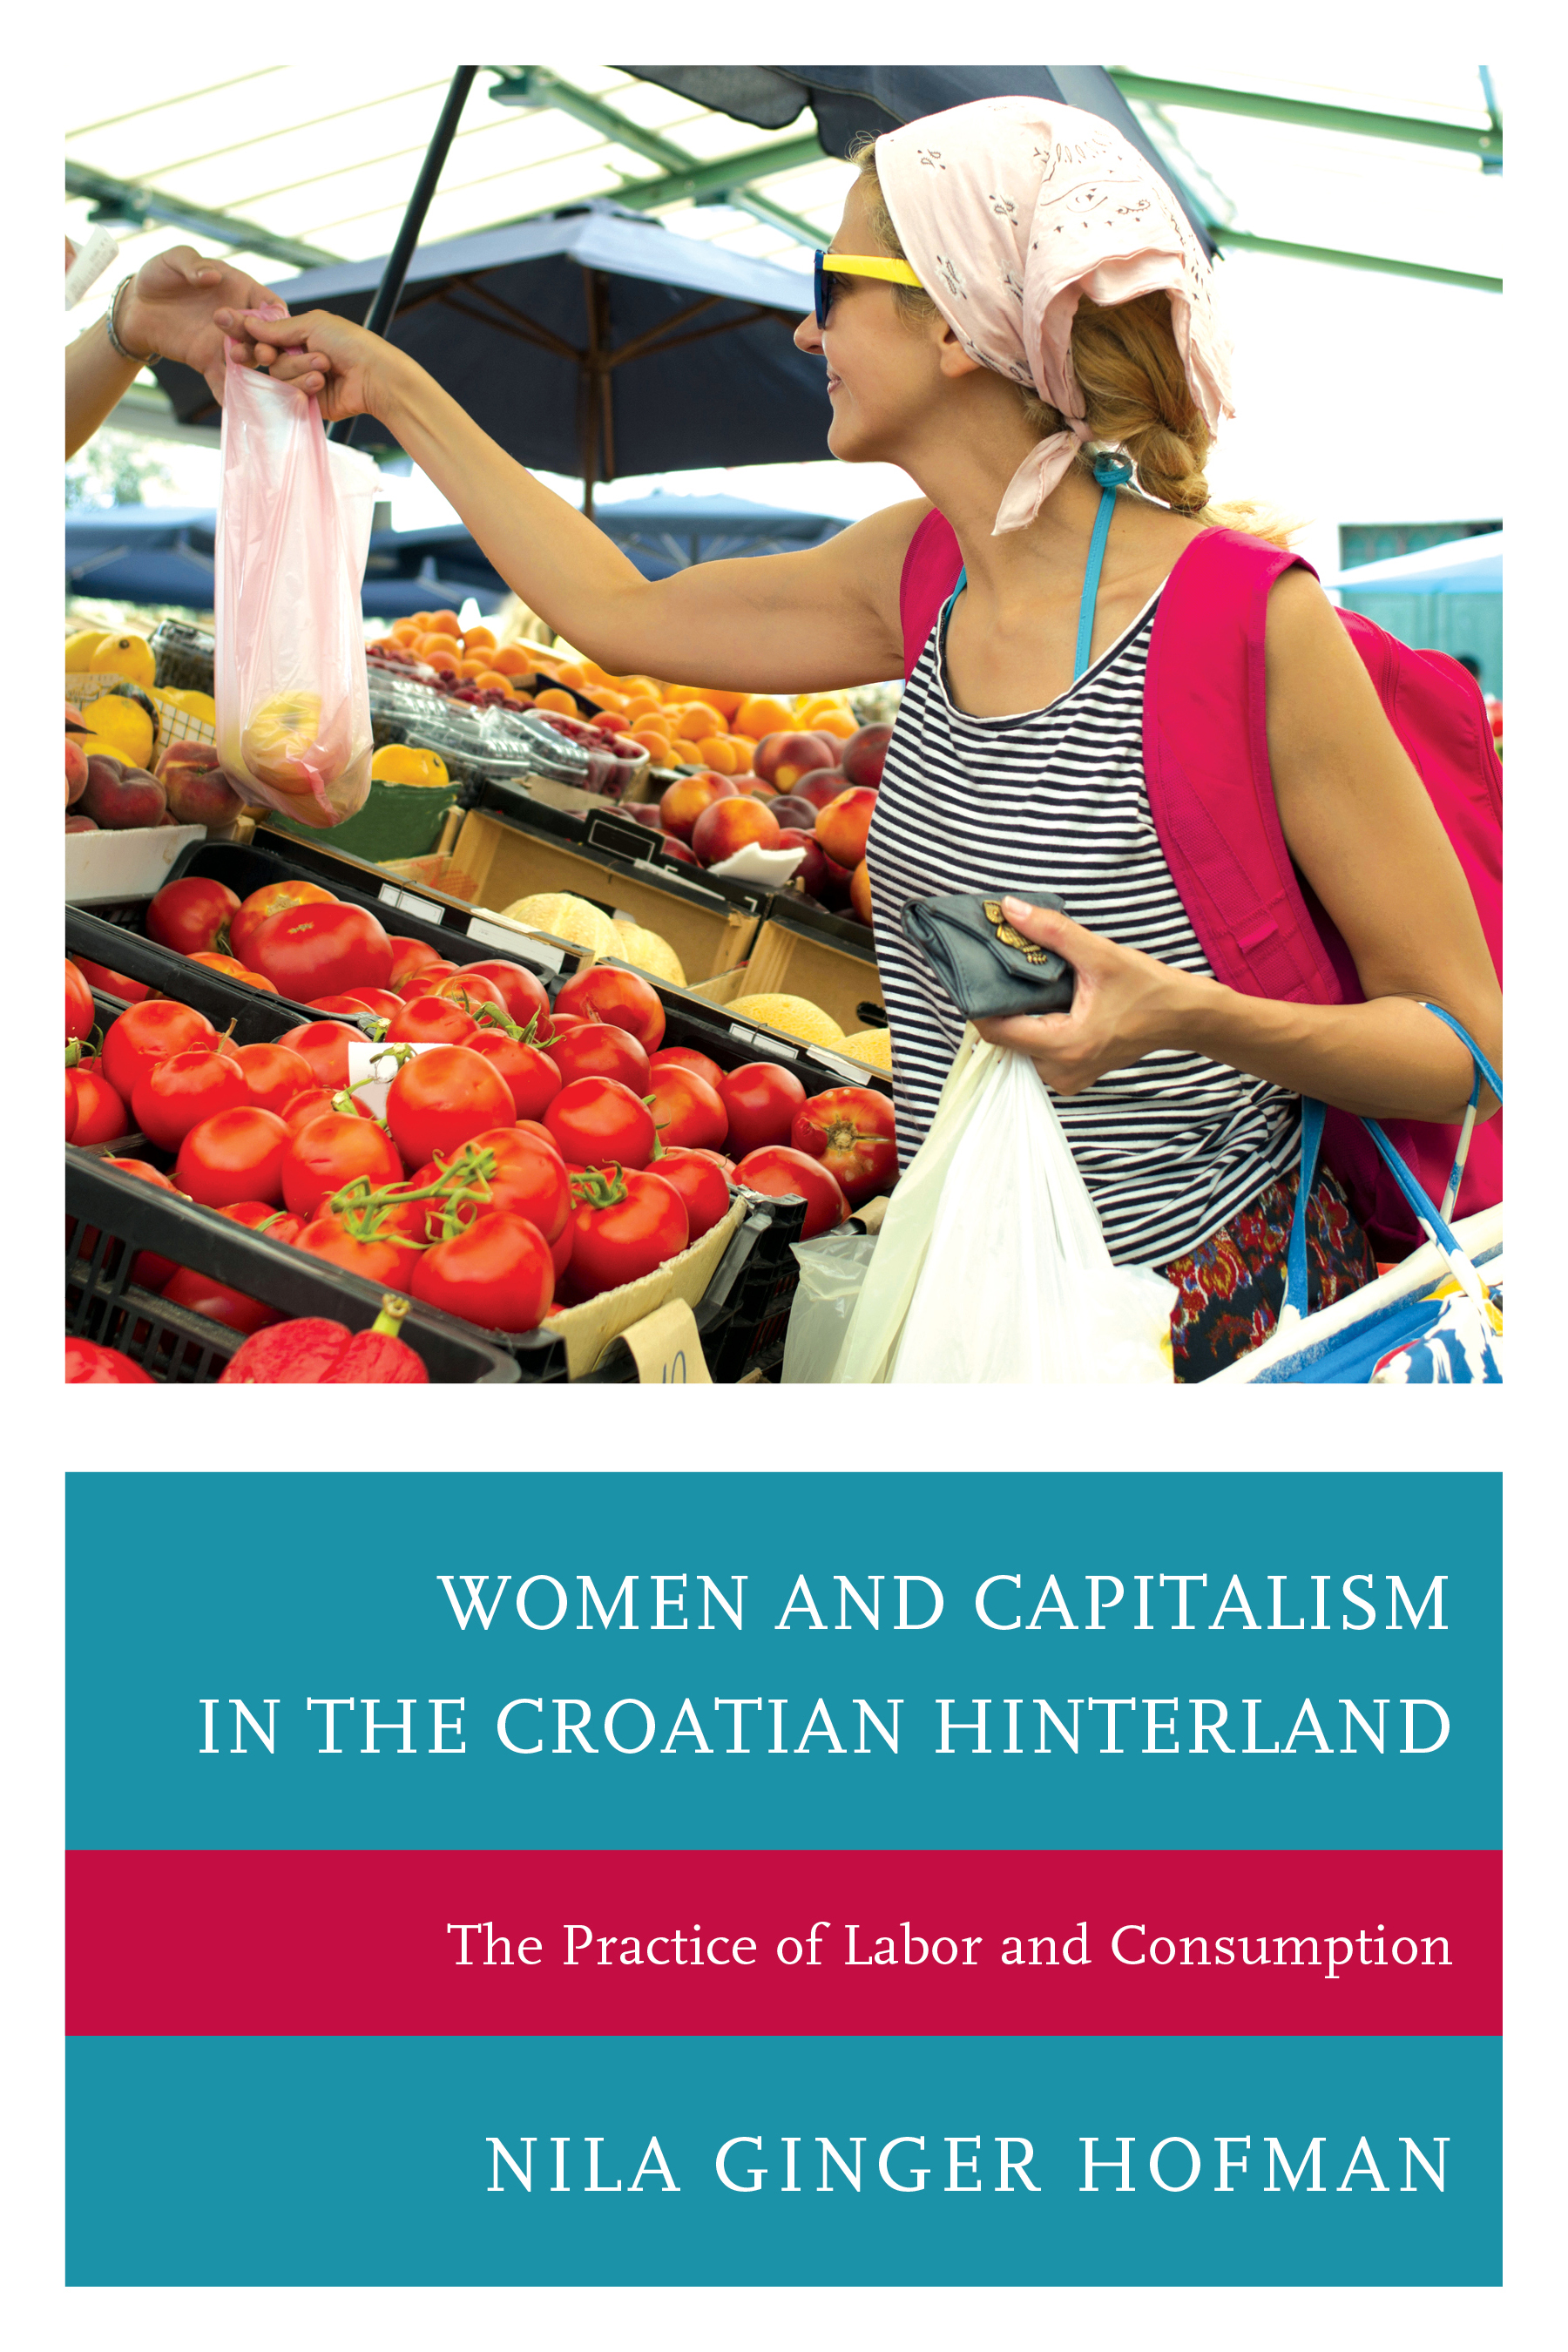 Women and Capitalism in the Croatian Hinterland: The Practice of Labor and Consumption